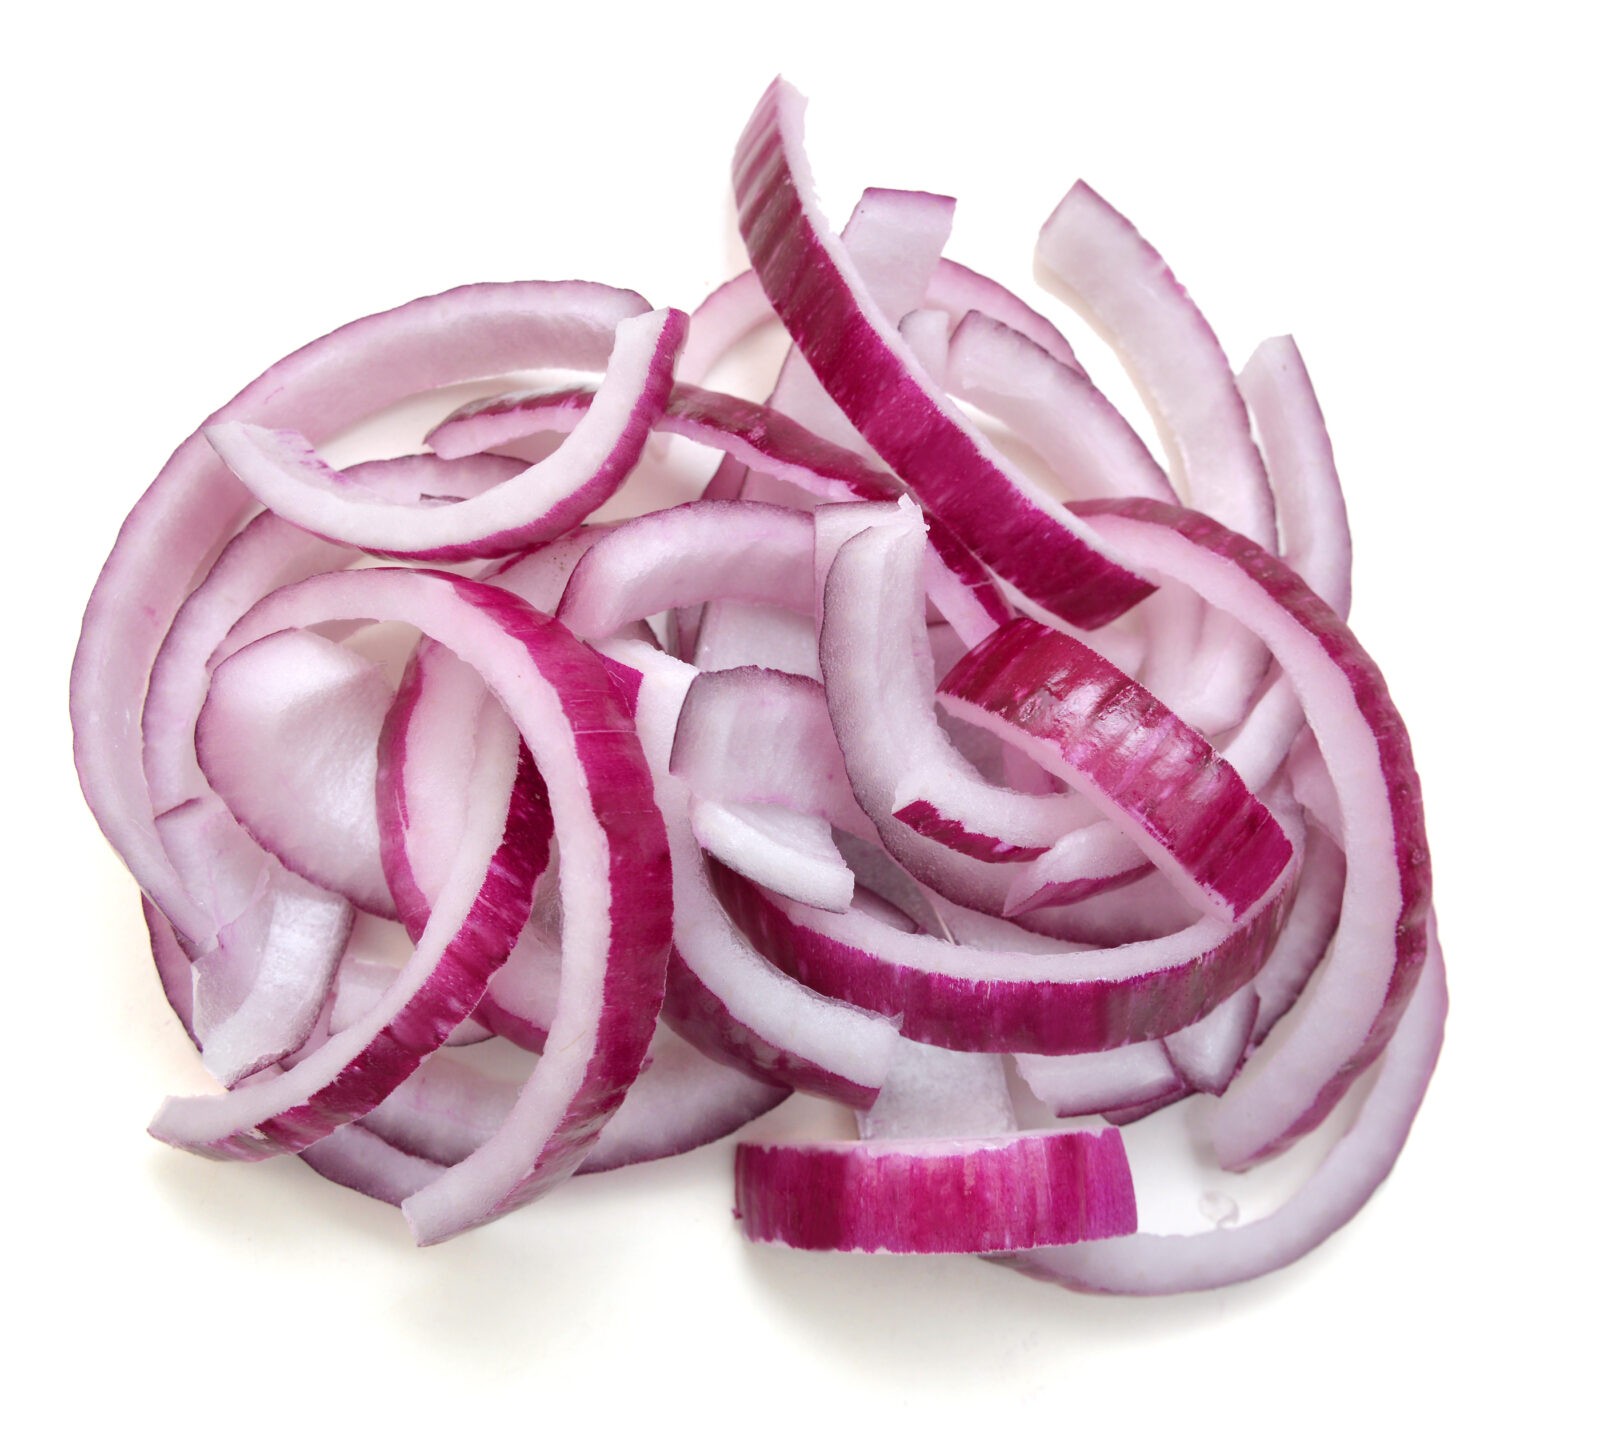 Close,Up,Of,Sliced,Red,Onion,On,White,Background